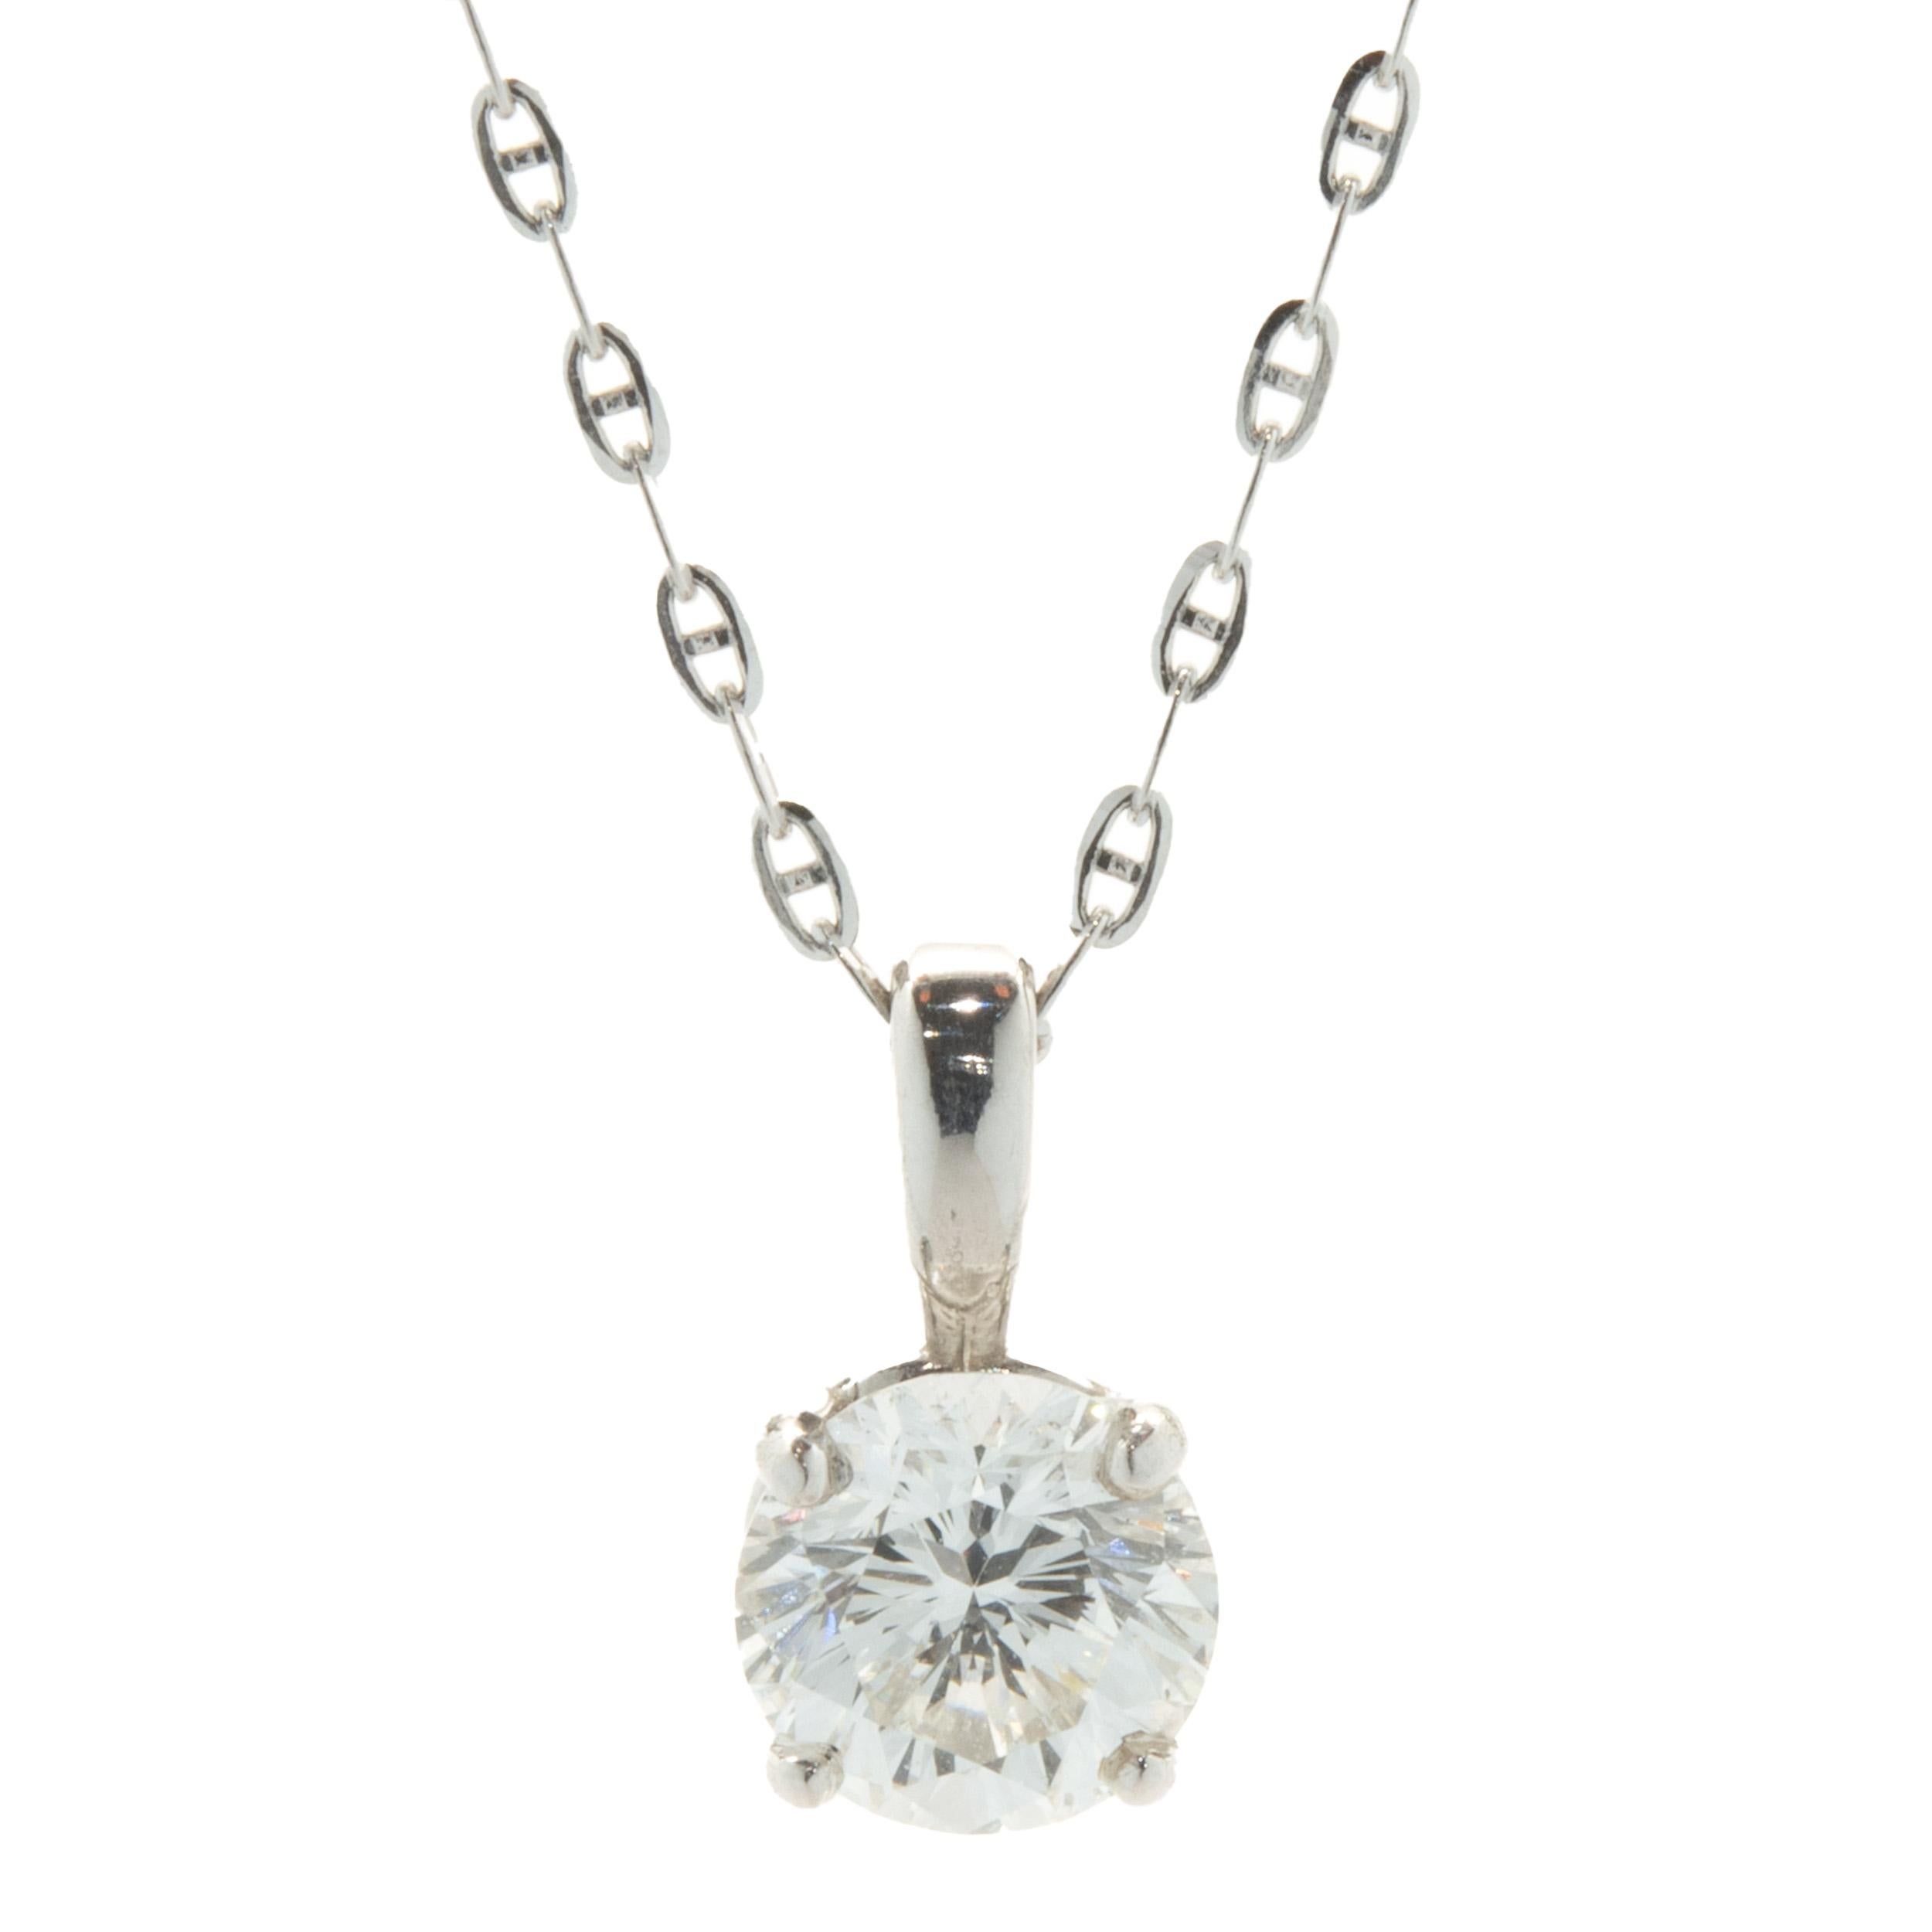 Designer: custom design
Material: 14K white gold
Diamond: 1 round brilliant cut = 0.70cttw
Color: G
Clarity: SI2
Dimensions: necklace measures 18-inches in length 
Weight: 1.03 grams
